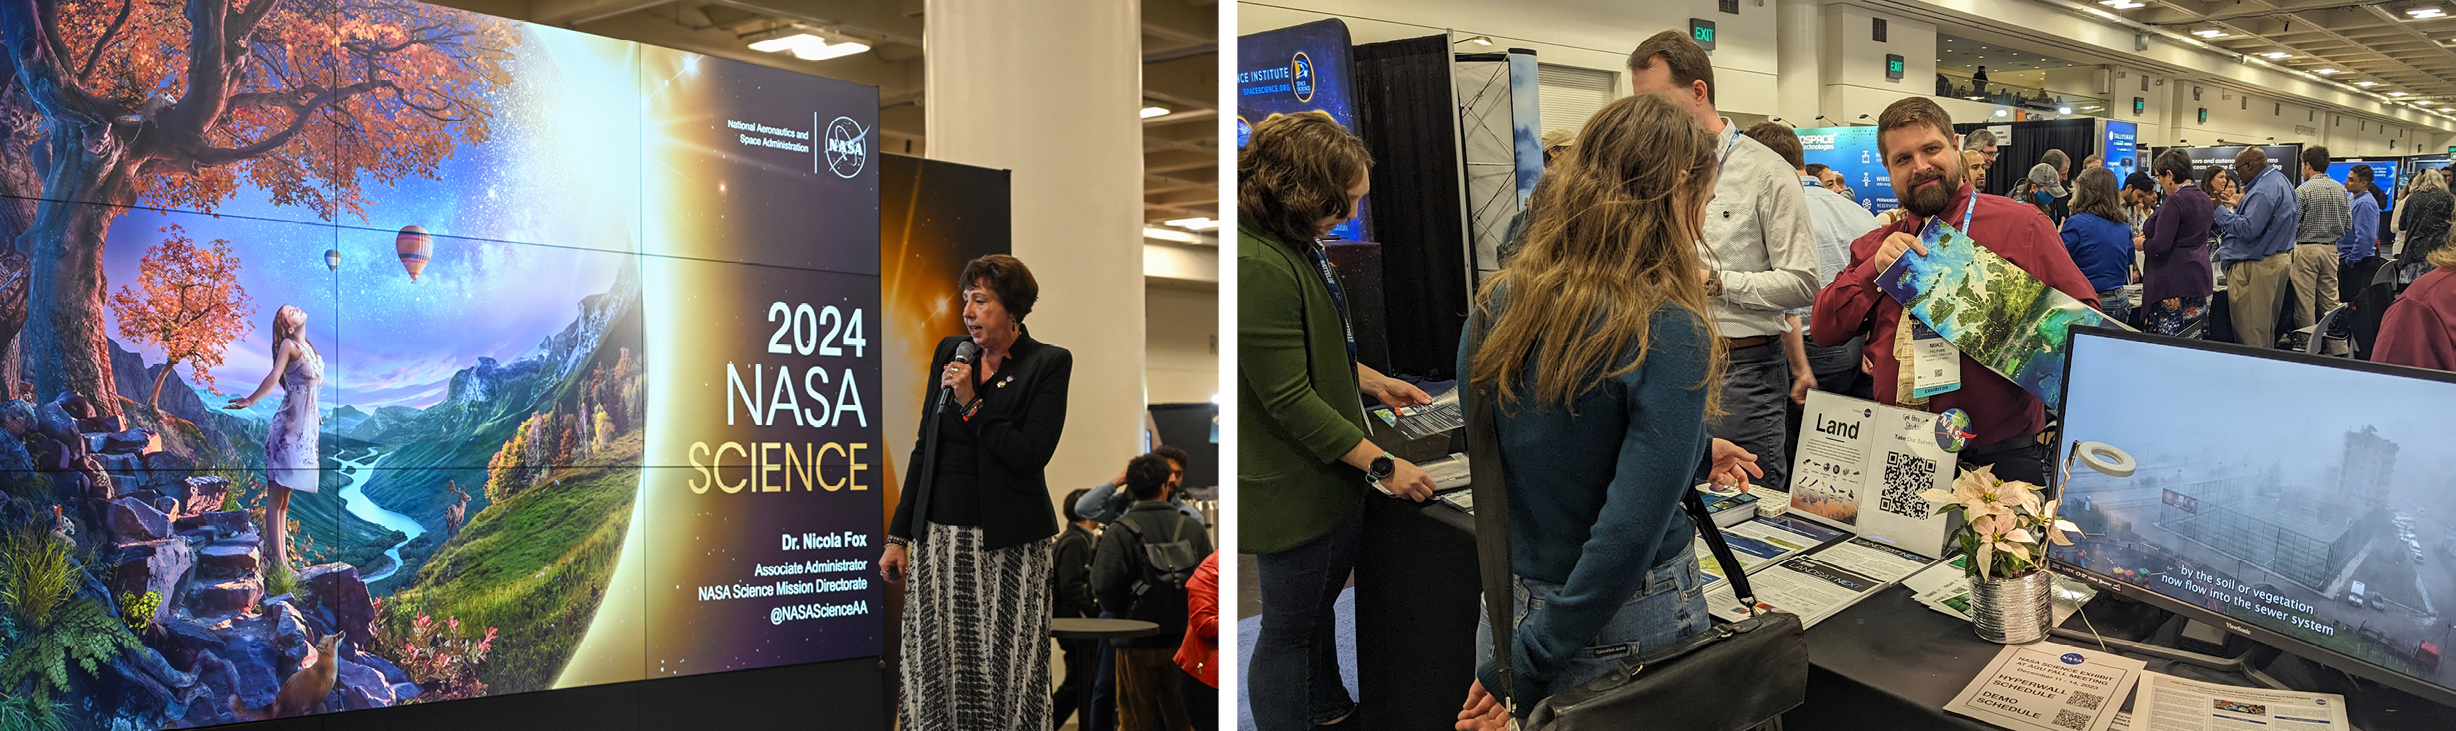 Photographs from the AGU NASA Exhibit showing Dr. Nicola Fox and Mike Taylor.